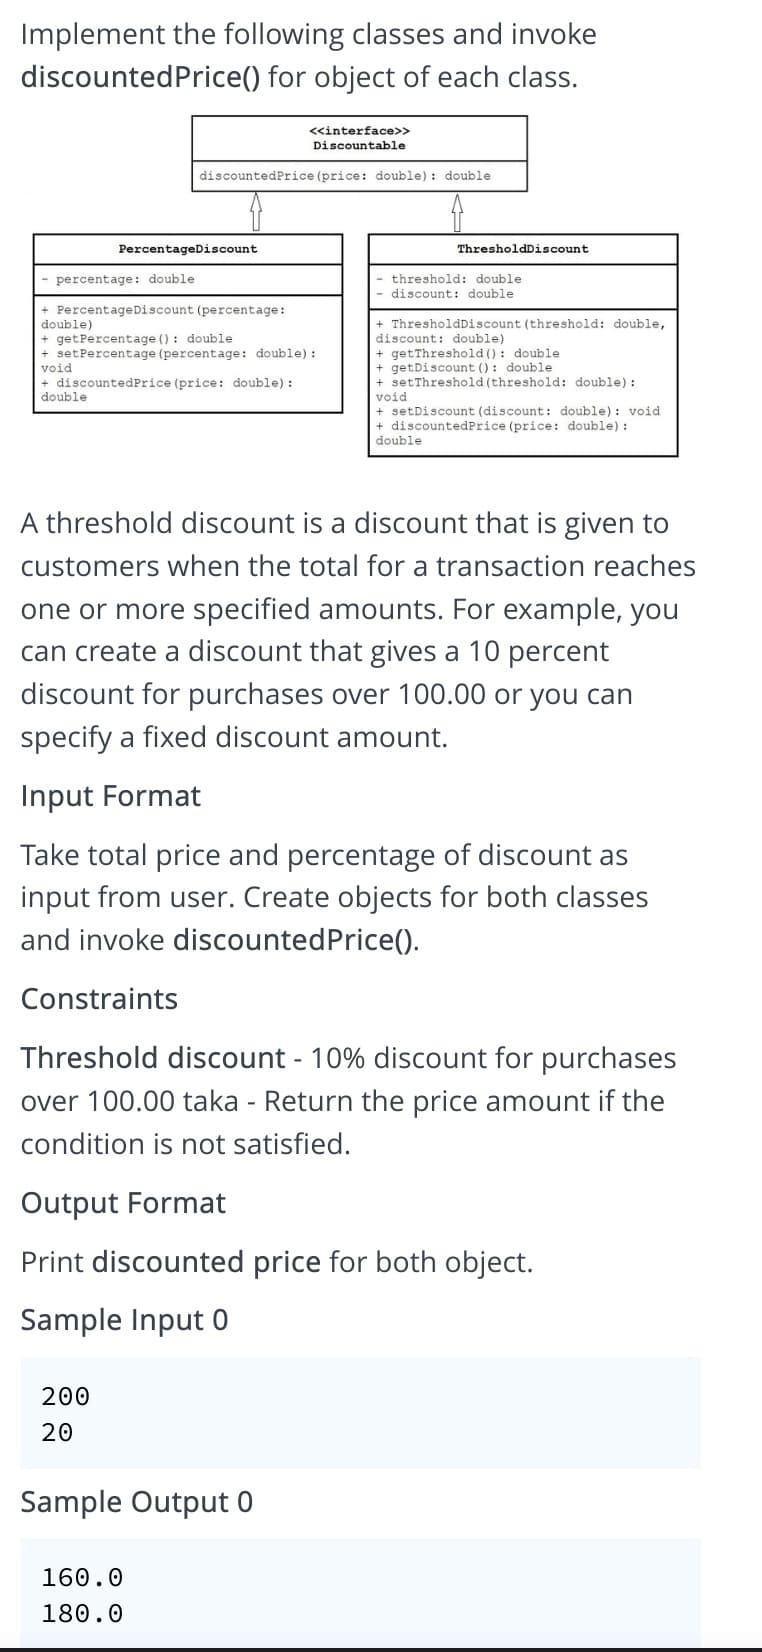 Implement the following classes and invoke
discountedPrice() for object of each class.
<<interface>>
Discountable
discountedPrice (price: double): double
PercentageDiscount
ThresholdDiscount
percentage: double
threshold: double
discount: double
+ PercentageDiscount (percentage:
+ ThresholdDiscount (threshold: double,
discount: double)
+ getThreshold (): double
+ getDiscount (): double
+ setThreshold (threshold: double) :
void
+ setDiscount (discount: double): void
+ discountedPrice (price: double) :
double)
+ getPercentage (): double
+ setPercentage (percentage: double) :
void
+ discountedPrice (price: double):
double
double
A threshold discount is a discount that is given to
customers when the total for a transaction reaches
one or more specified amounts. For example, you
can create a discount that gives a 10 percent
discount for purchases over 100.00 or you can
specify a fixed discount amount.
Input Format
Take total price and percentage of discount as
input from user. Create objects for both classes
and invoke discountedPrice().
Constraints
Threshold discount - 10% discount for purchases
over 100.00 taka - Return the price amount if the
condition is not satisfied.
Output Format
Print discounted price for both object.
Sample Input 0
200
20
Sample Output 0
160.0
180.0
